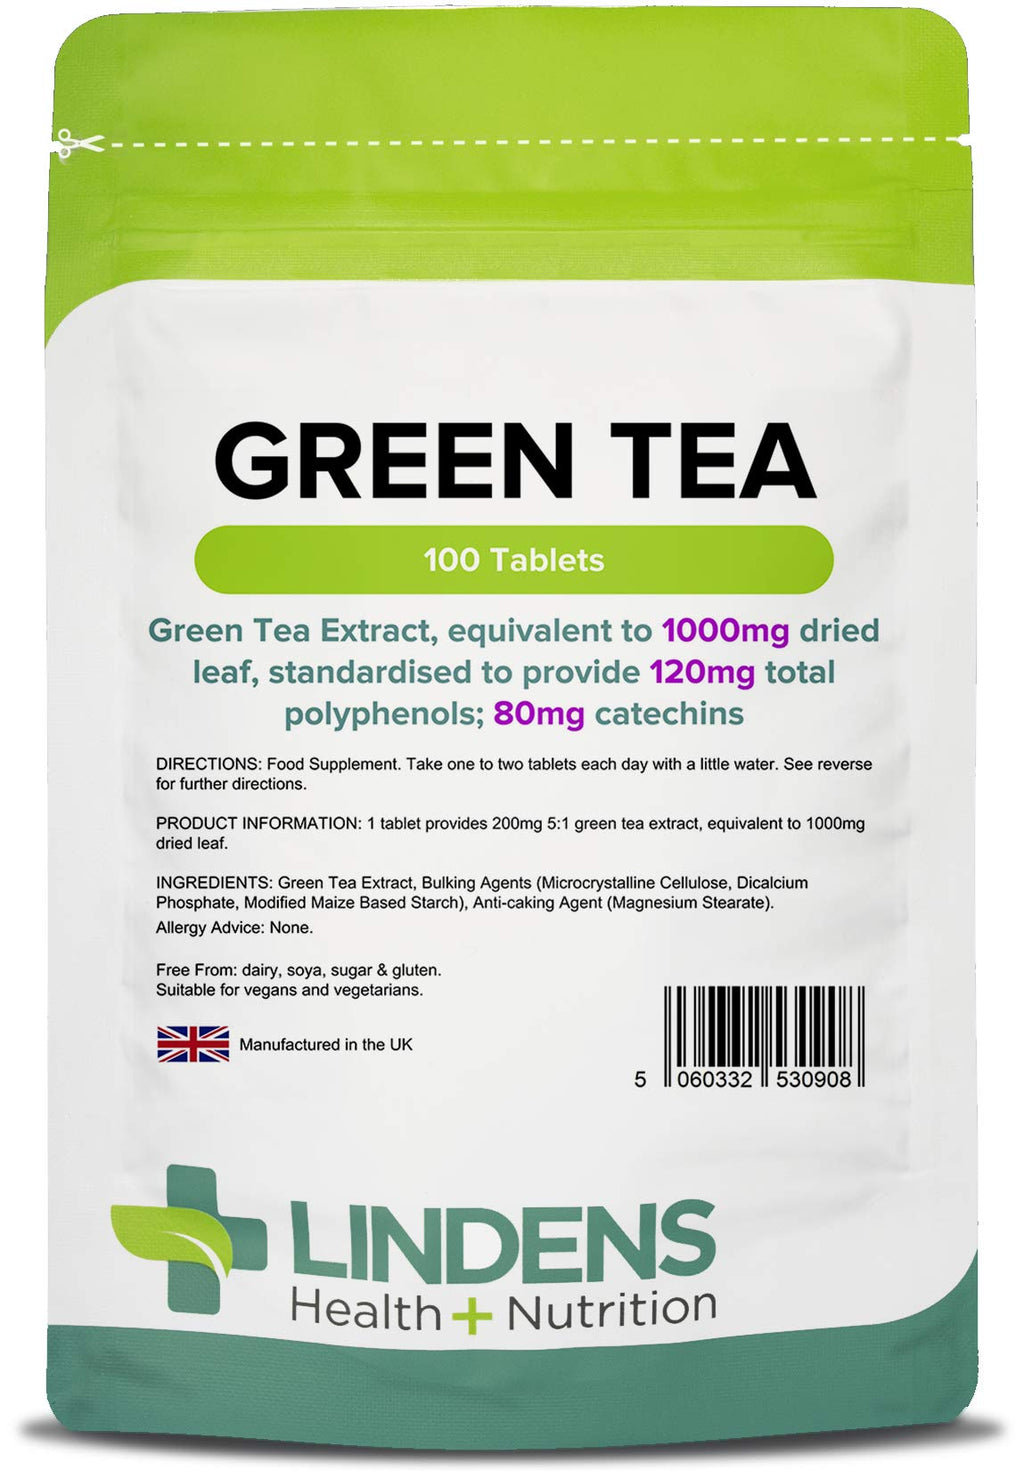 [Australia] - Lindens Green Tea 1000mg Tablets - 100 Pack - Green Tea Extract, Equivalent to 1000mg Dried Leaf, Standardised to Provide 120mg Total Polyphenols; 80mg Catechins - UK Manufacturer, Letterbox Friendly 